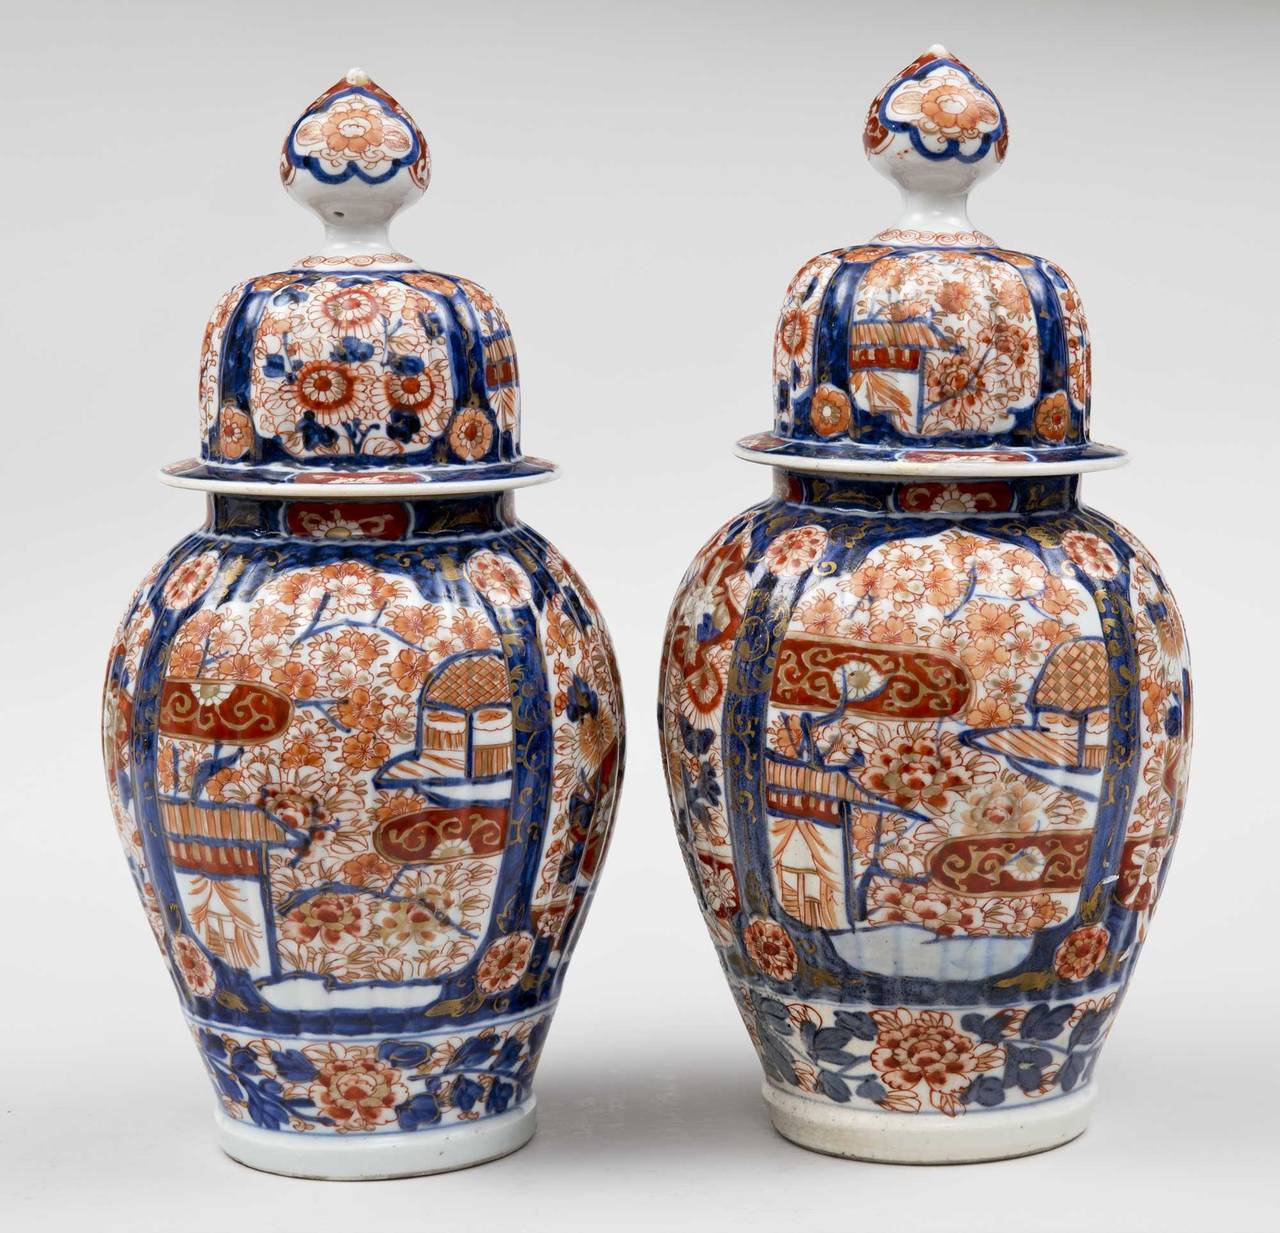 Polychromed Pair of Imari Ribbed Vases and Covers